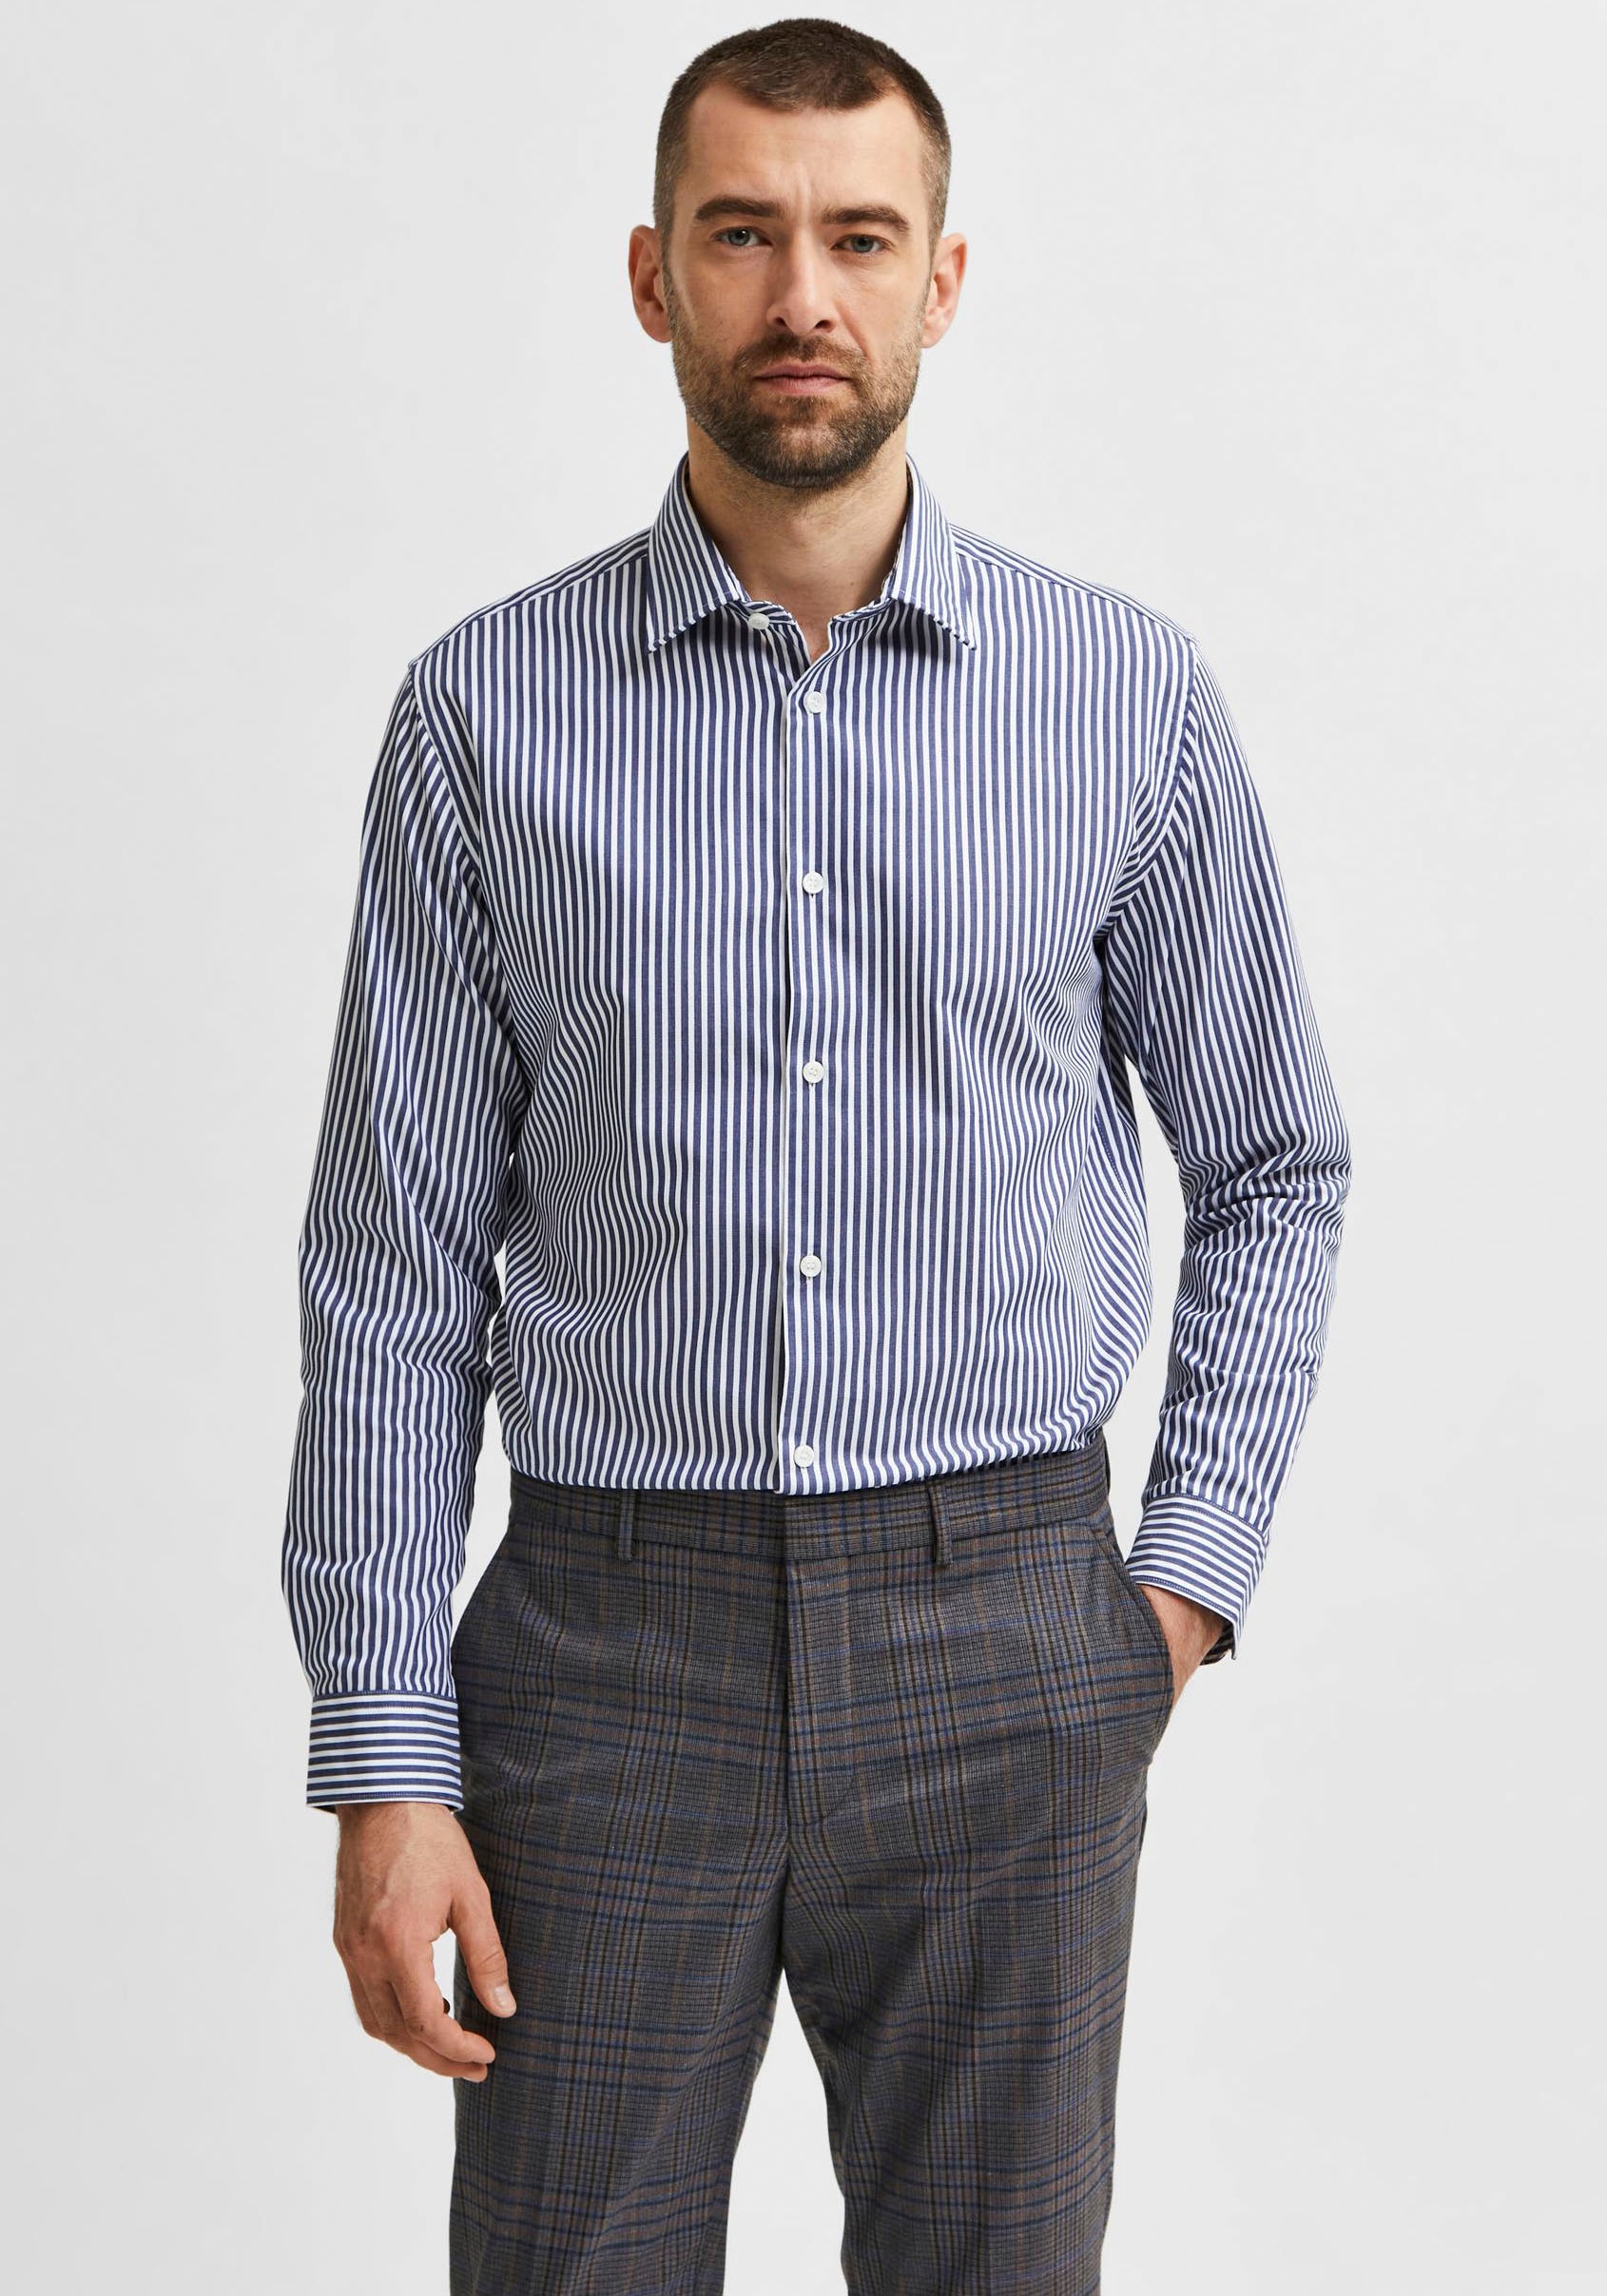 HOMME »SLHSLIMETHAN Businesshemd bei OTTO SHIRT« SELECTED kaufen online